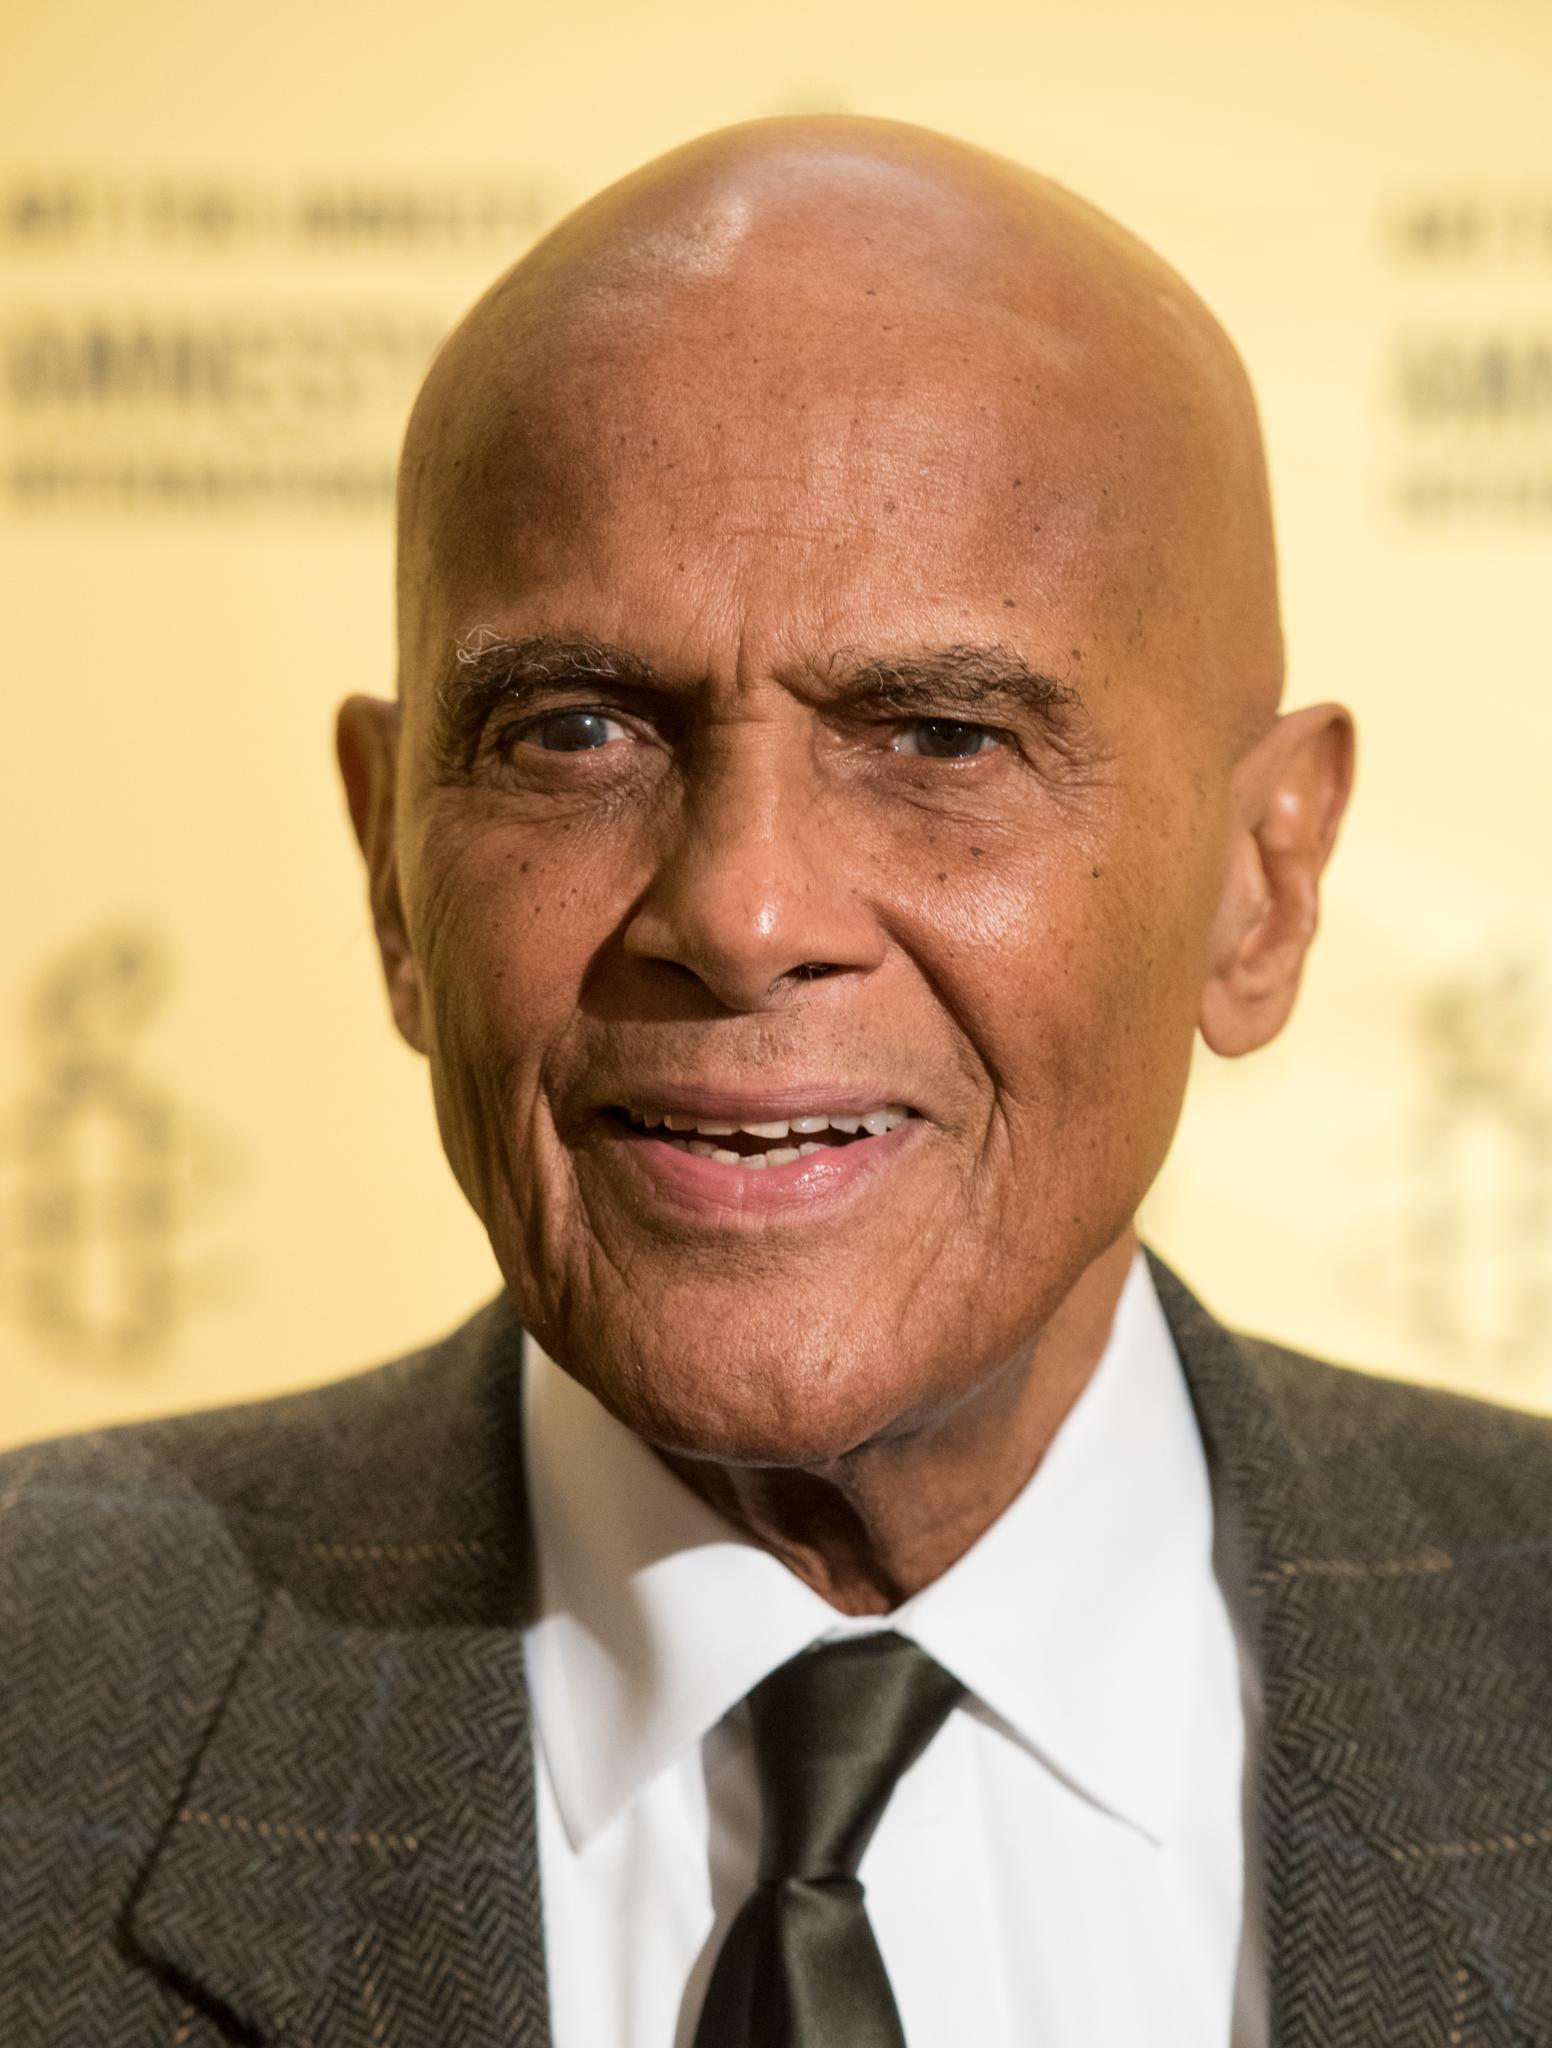 Harry Belafonte on Amnesty International, Mali Music, and Why He'll Never Retire